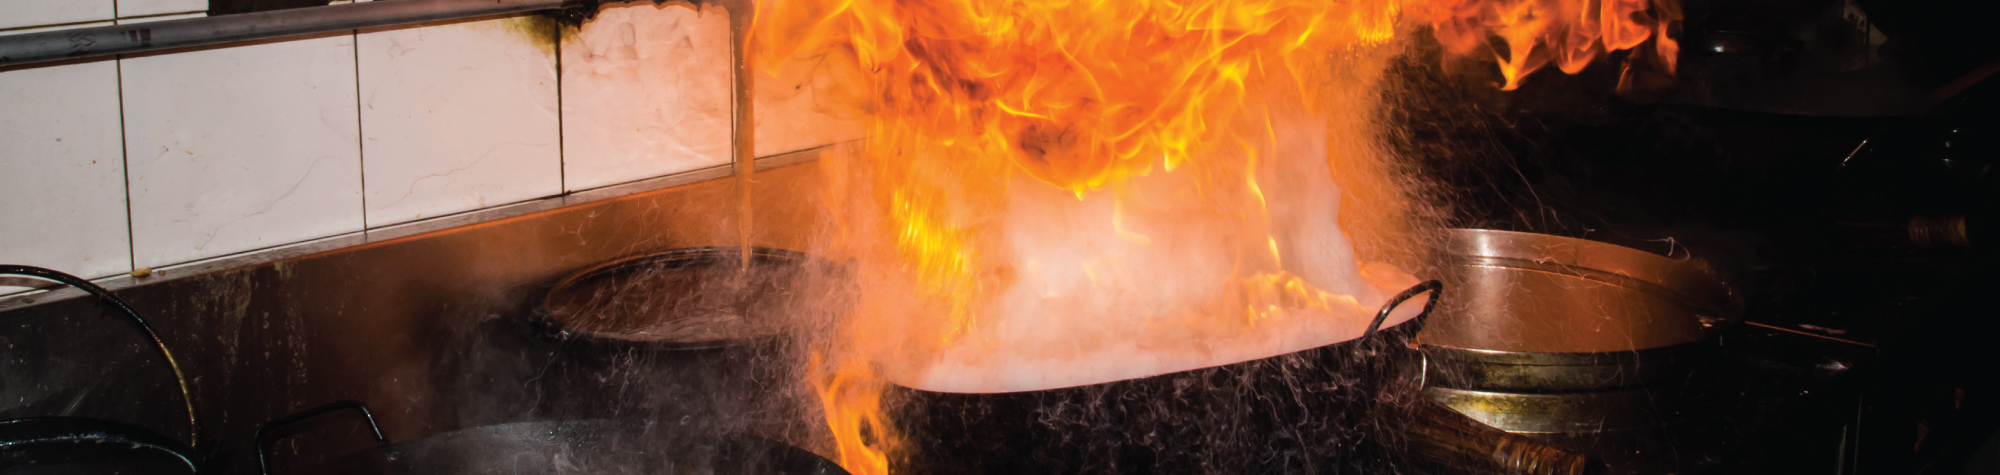 Restaurant Fire Prevention and Safety Tips